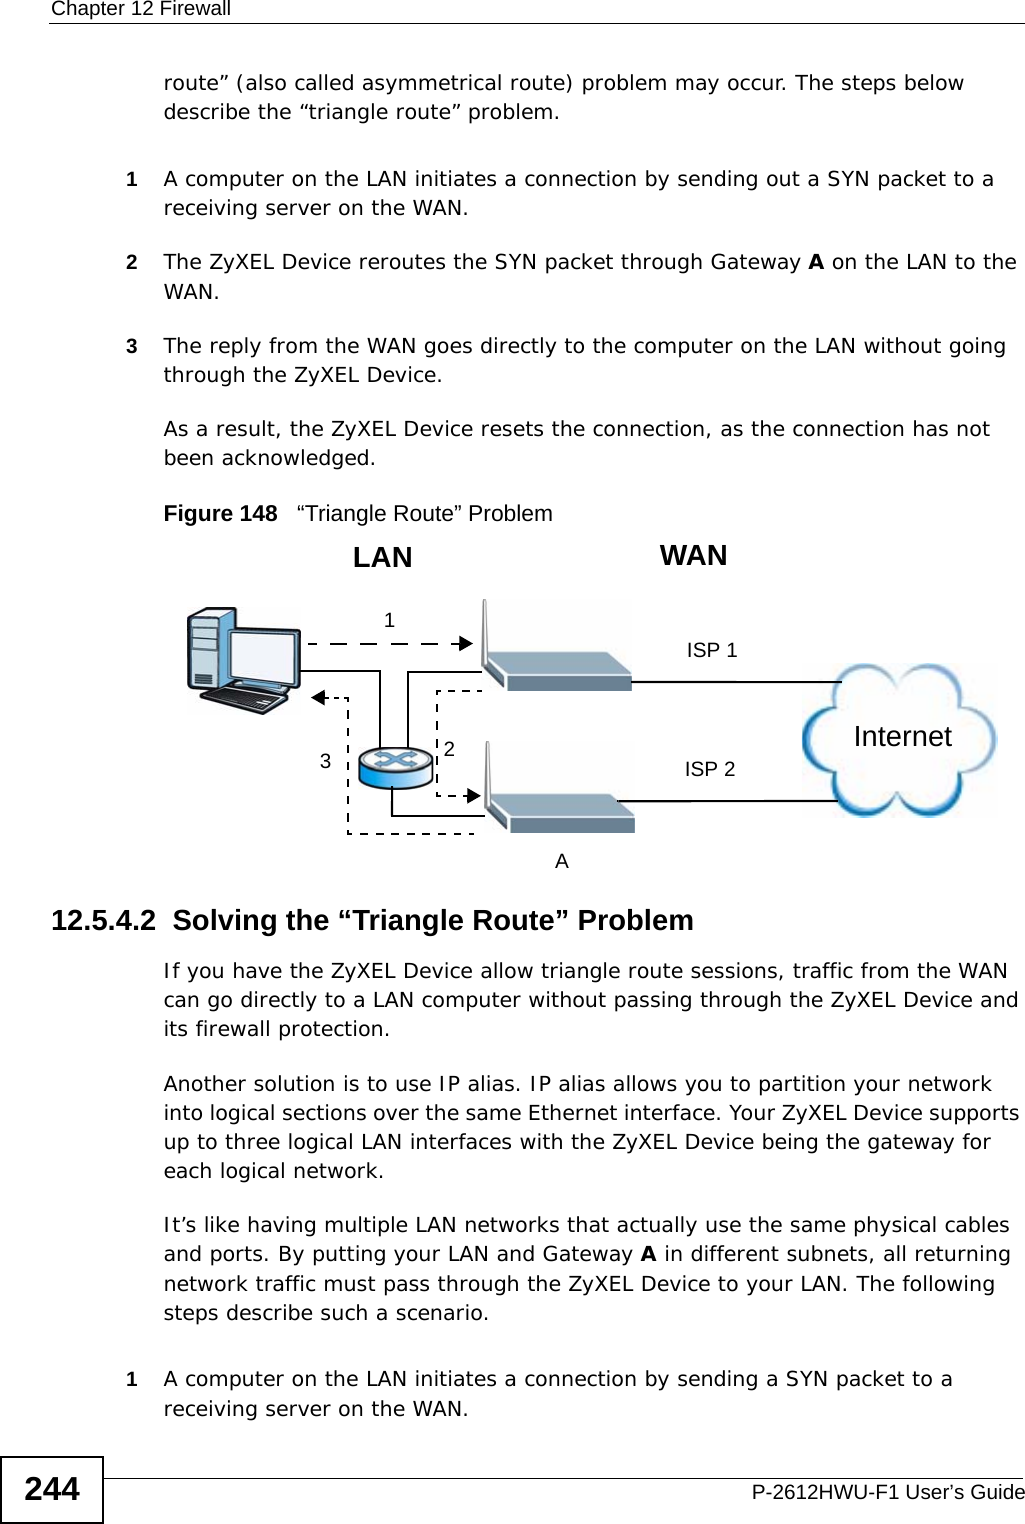 Chapter 12 FirewallP-2612HWU-F1 User’s Guide244route” (also called asymmetrical route) problem may occur. The steps below describe the “triangle route” problem. 1A computer on the LAN initiates a connection by sending out a SYN packet to a receiving server on the WAN.2The ZyXEL Device reroutes the SYN packet through Gateway A on the LAN to the WAN. 3The reply from the WAN goes directly to the computer on the LAN without going through the ZyXEL Device. As a result, the ZyXEL Device resets the connection, as the connection has not been acknowledged.Figure 148   “Triangle Route” Problem12.5.4.2  Solving the “Triangle Route” ProblemIf you have the ZyXEL Device allow triangle route sessions, traffic from the WAN can go directly to a LAN computer without passing through the ZyXEL Device and its firewall protection. Another solution is to use IP alias. IP alias allows you to partition your network into logical sections over the same Ethernet interface. Your ZyXEL Device supports up to three logical LAN interfaces with the ZyXEL Device being the gateway for each logical network. It’s like having multiple LAN networks that actually use the same physical cables and ports. By putting your LAN and Gateway A in different subnets, all returning network traffic must pass through the ZyXEL Device to your LAN. The following steps describe such a scenario.1A computer on the LAN initiates a connection by sending a SYN packet to a receiving server on the WAN. 123WANLANAISP 1ISP 2Internet